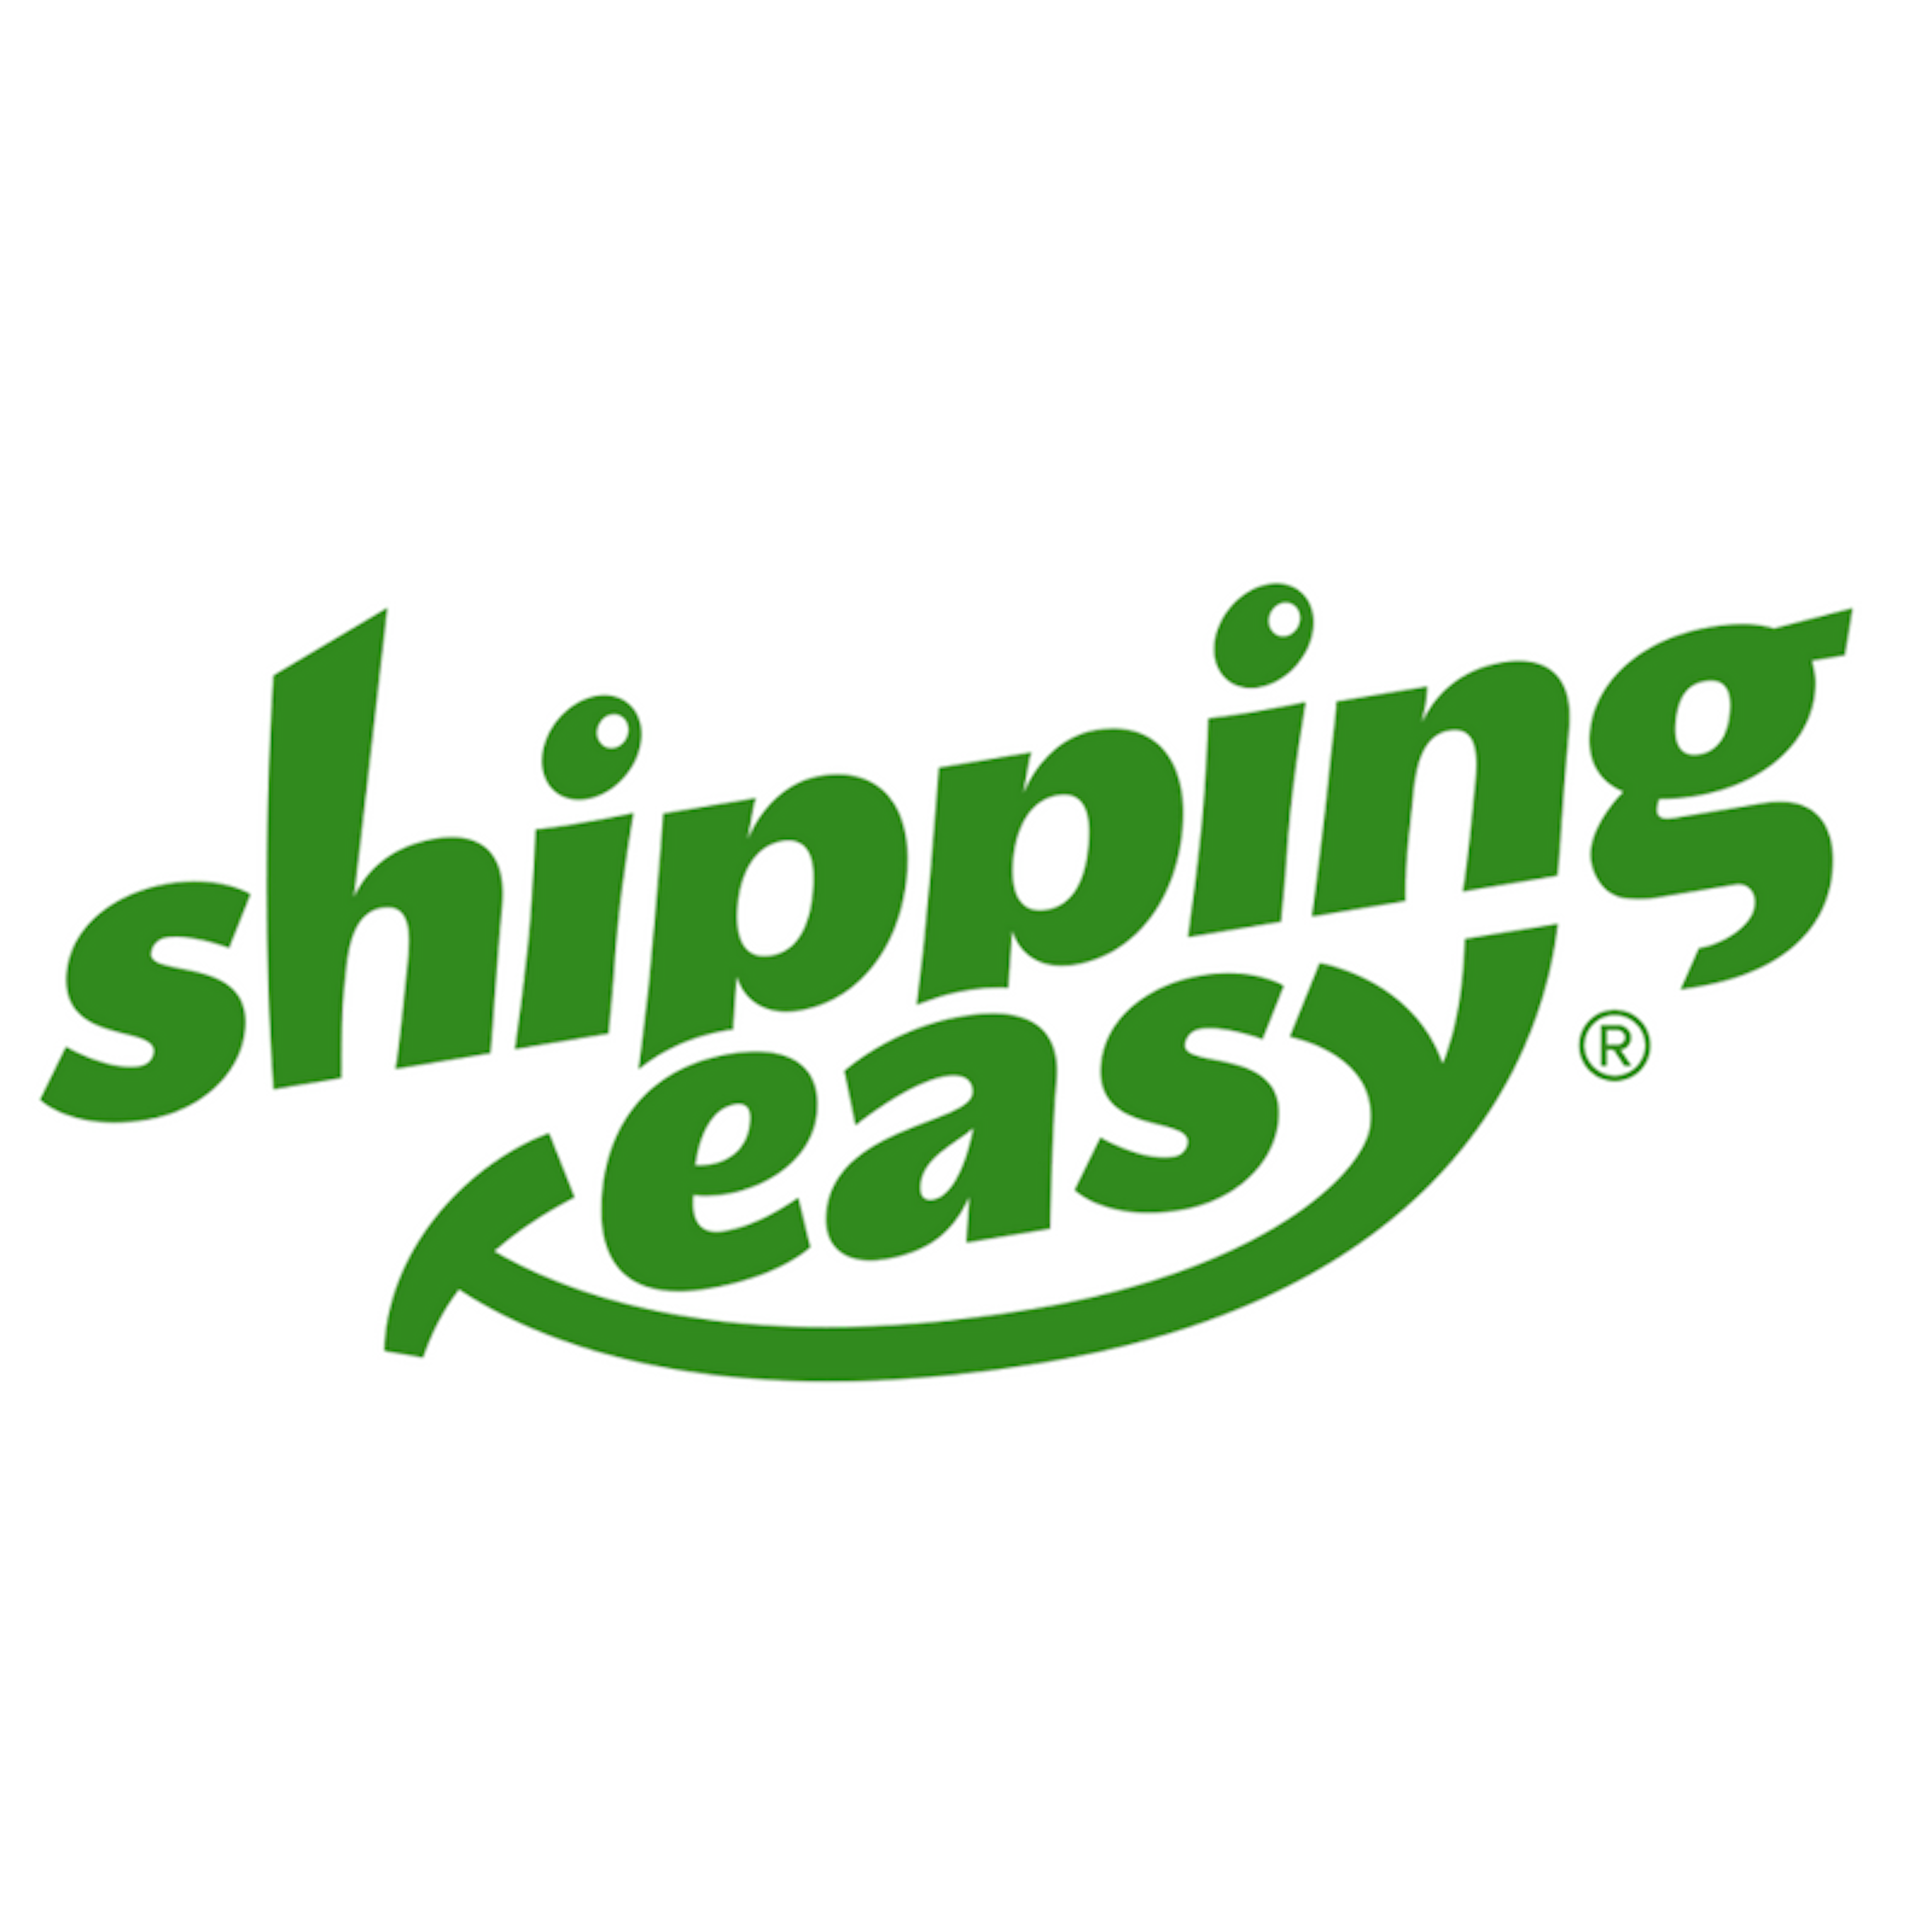 Shippingeasy Pricing Features Reviews And Alternatives Getapp 4550